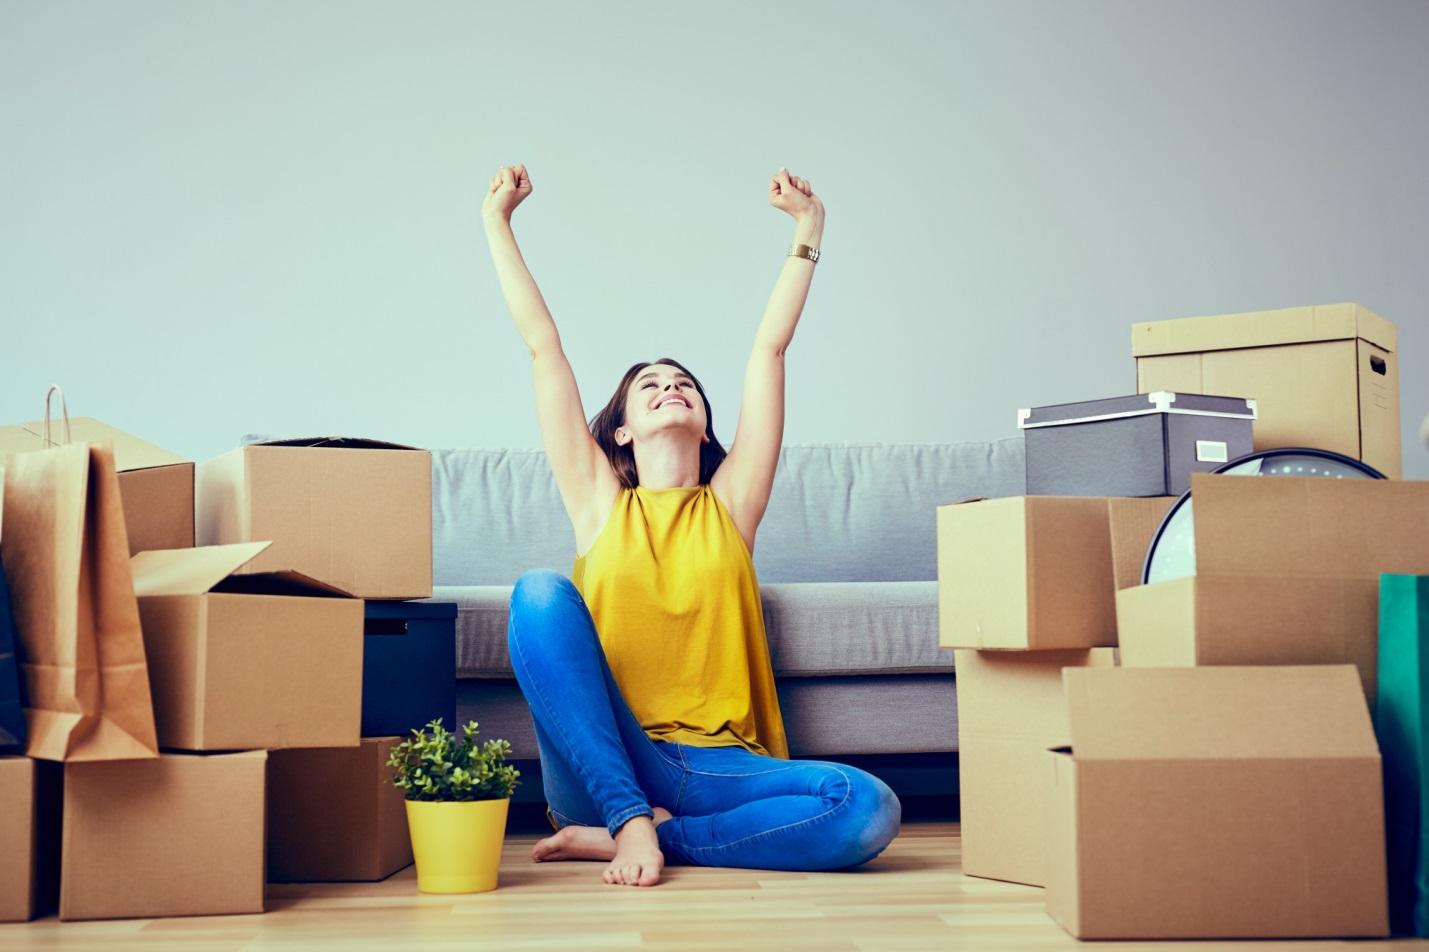 A woman surrounded by moving boxes, organizing house essentials.